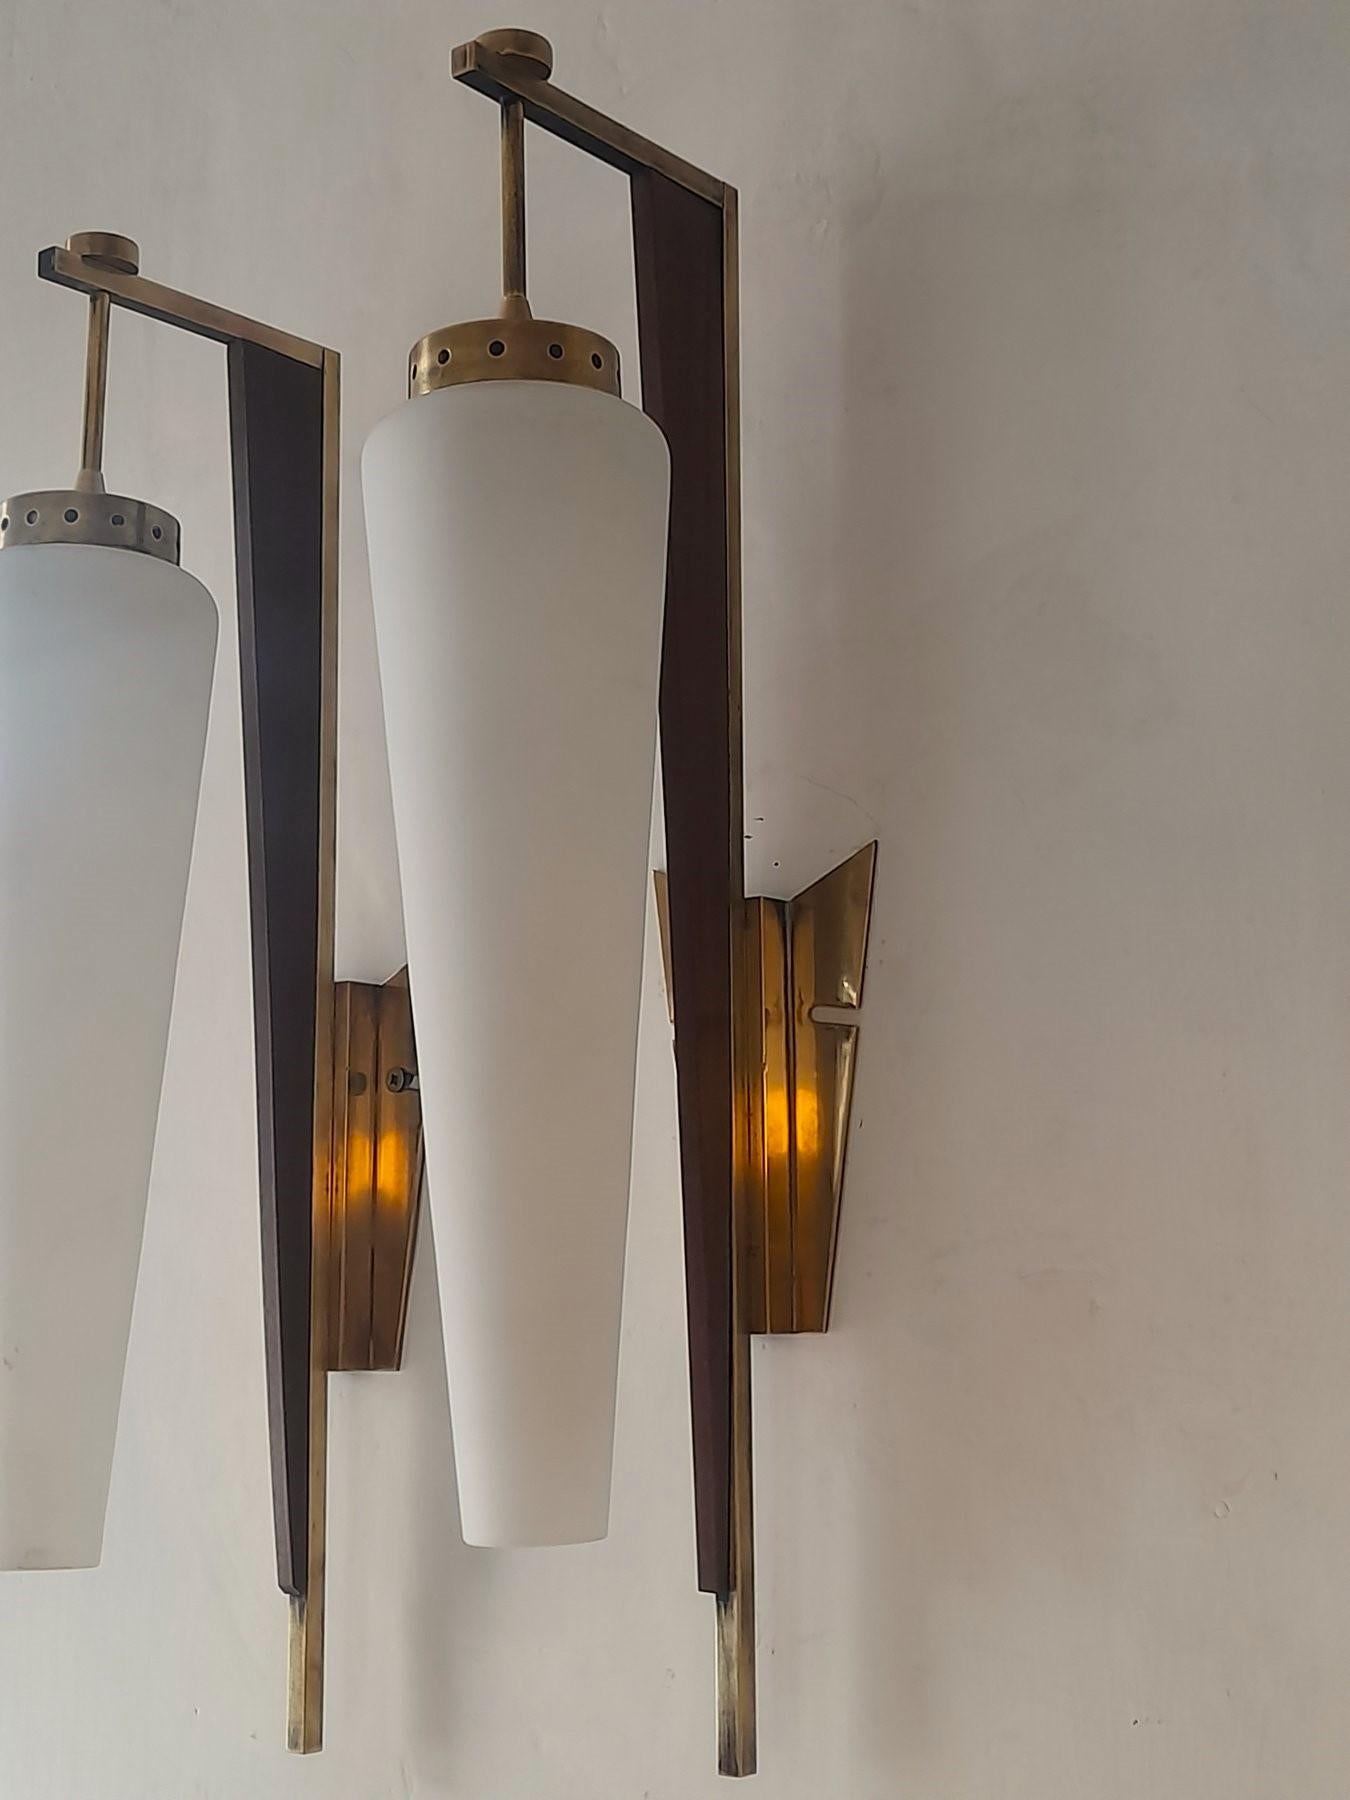 Three Stilnovo Sconces Wall Lights Brass Satin Glass Wood Accents, Italy, 1950s For Sale 1